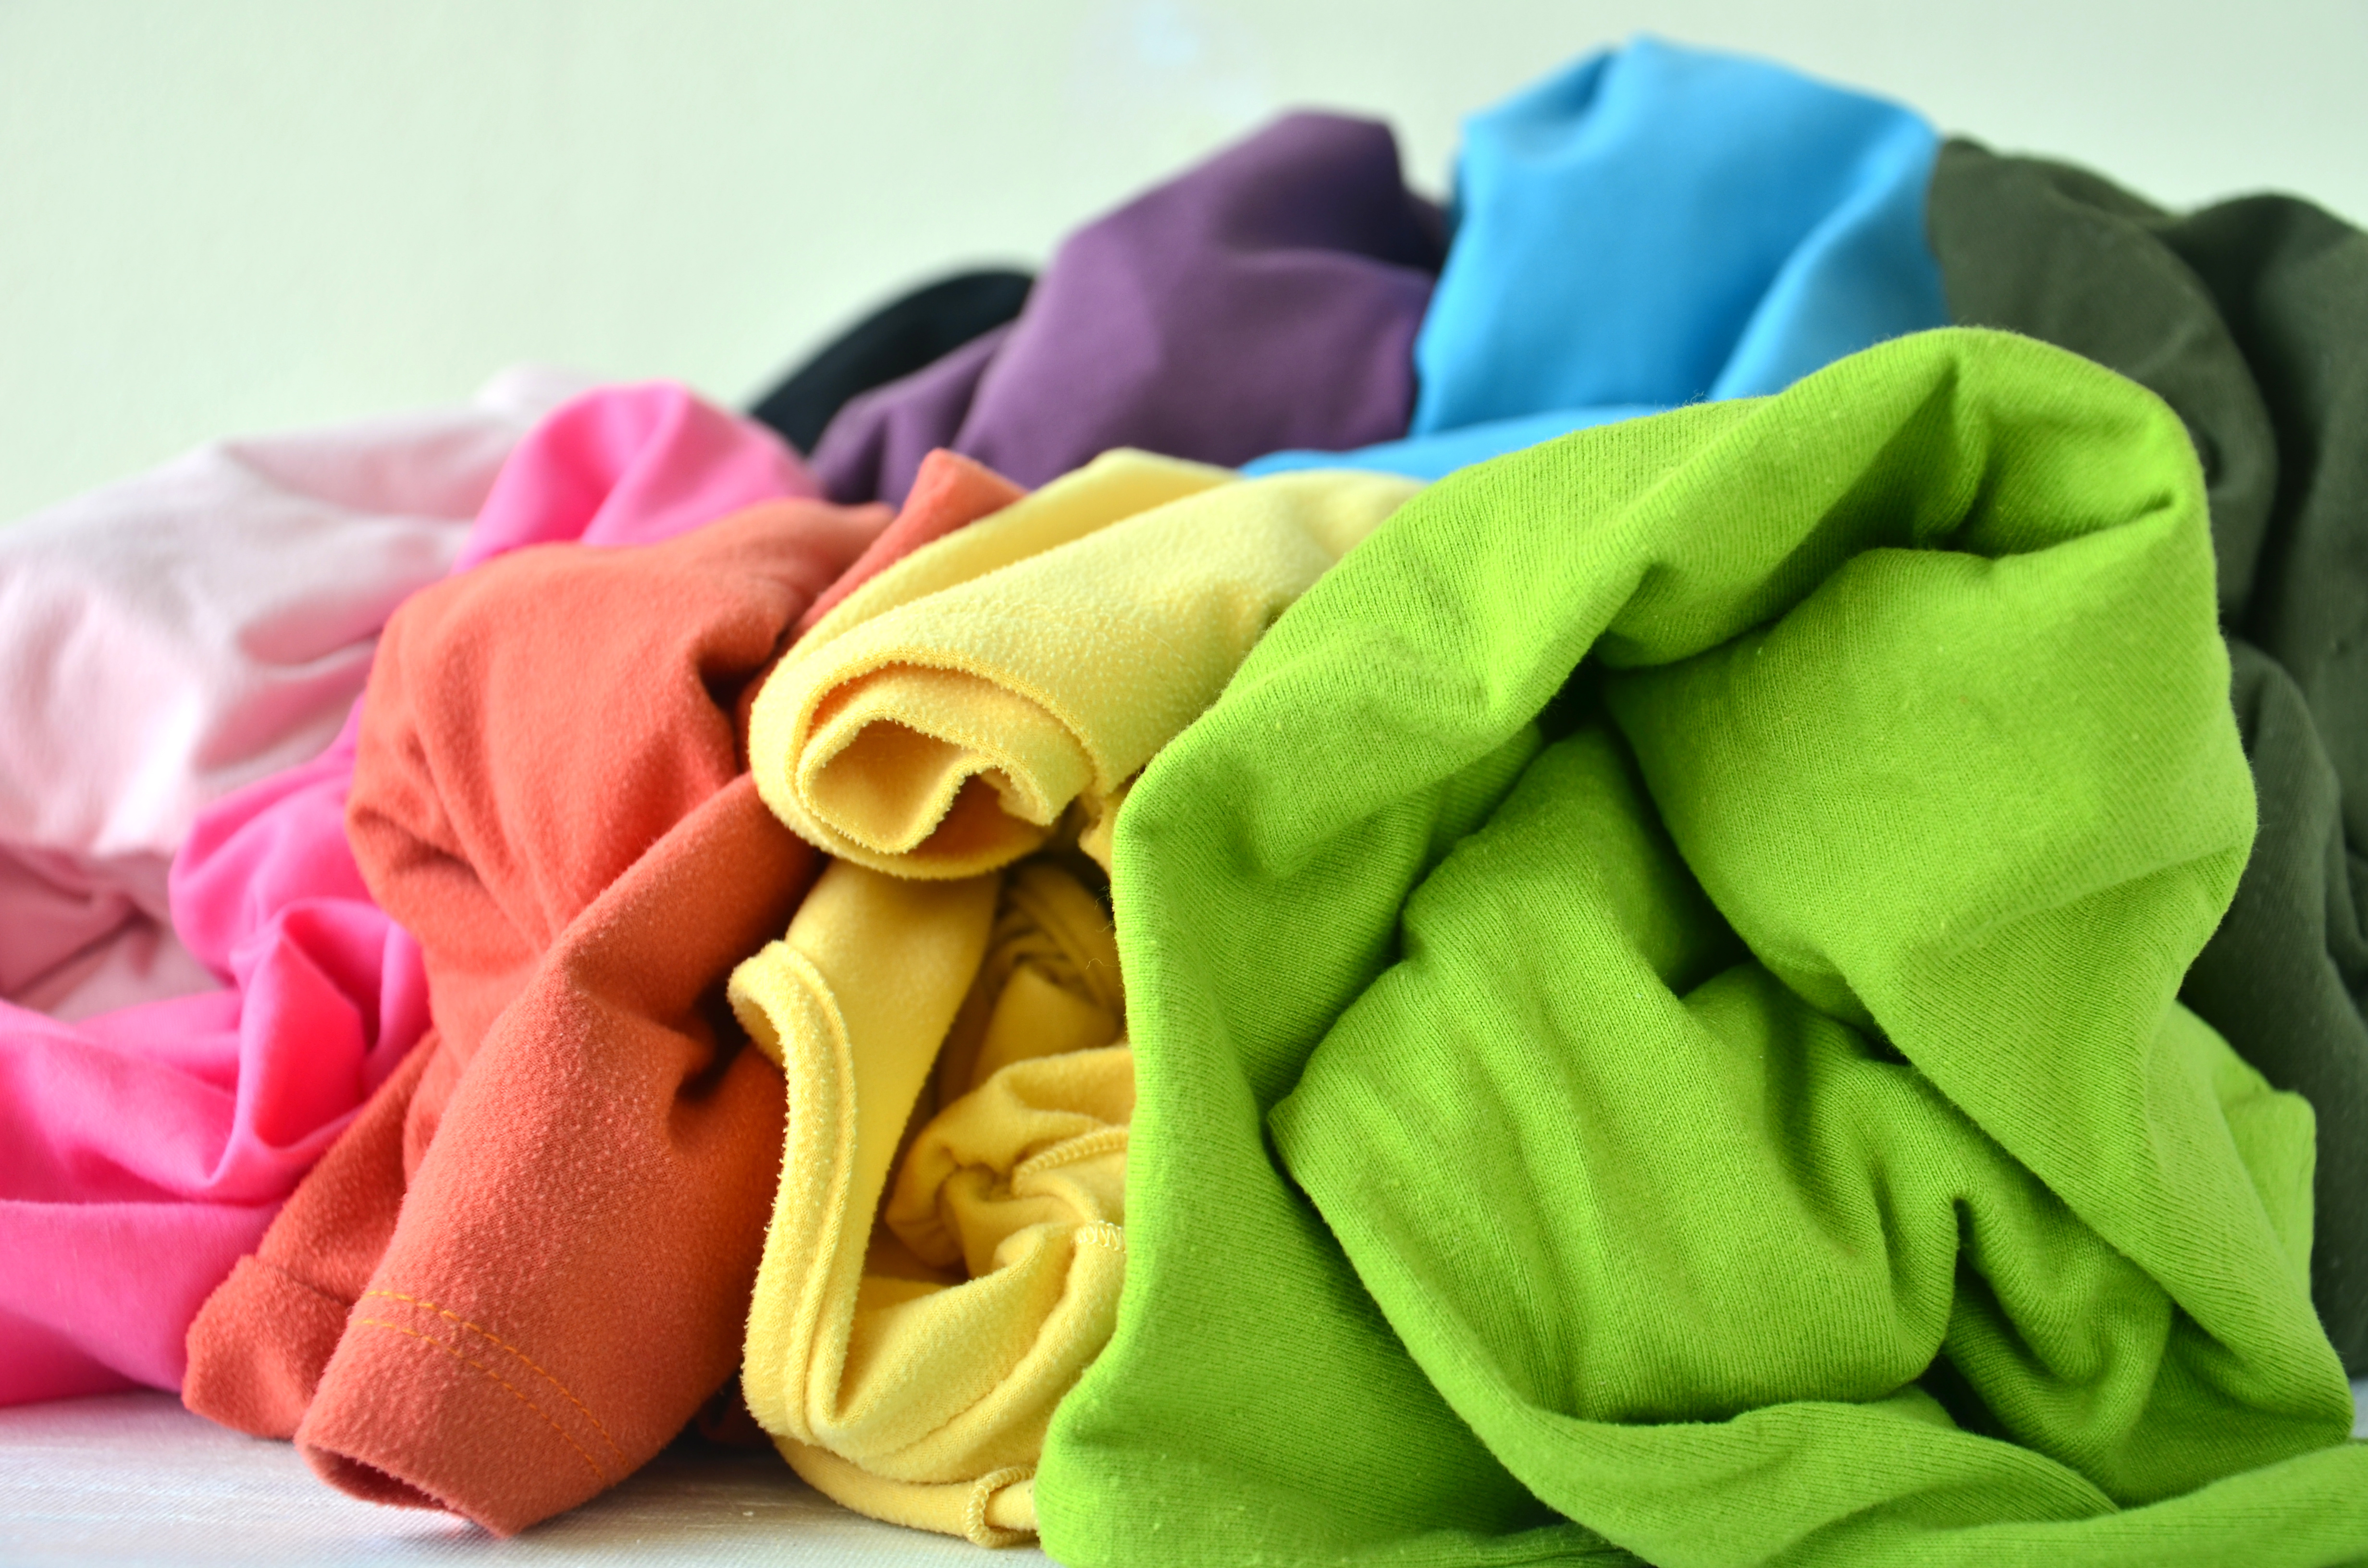 Apparel and Textile Testing Services | Consumer Product Services